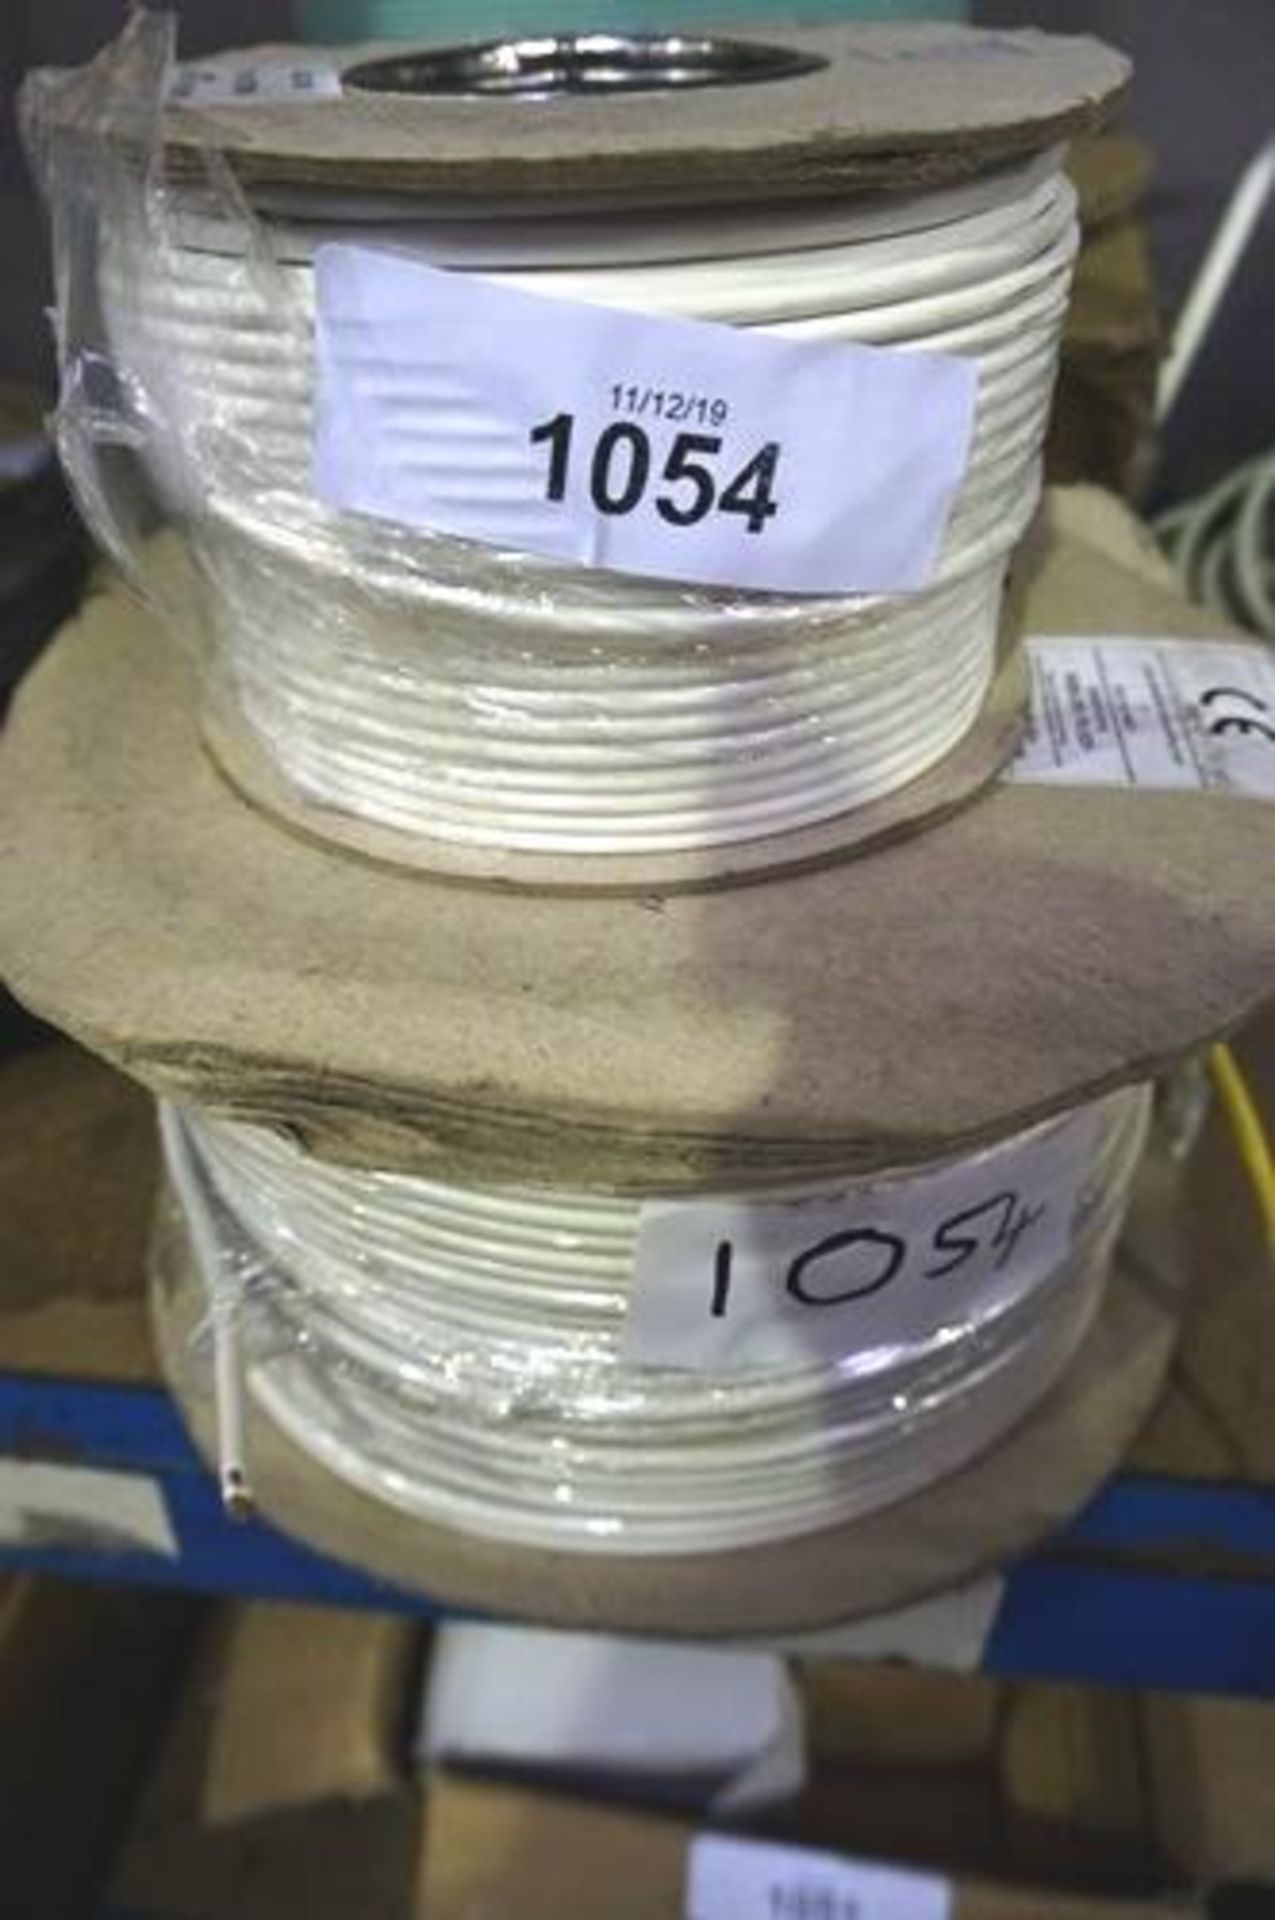 3 x assorted electrical cable rolls, 1 x 100m 4 core white, 1 x single core brown/brown 100m cable